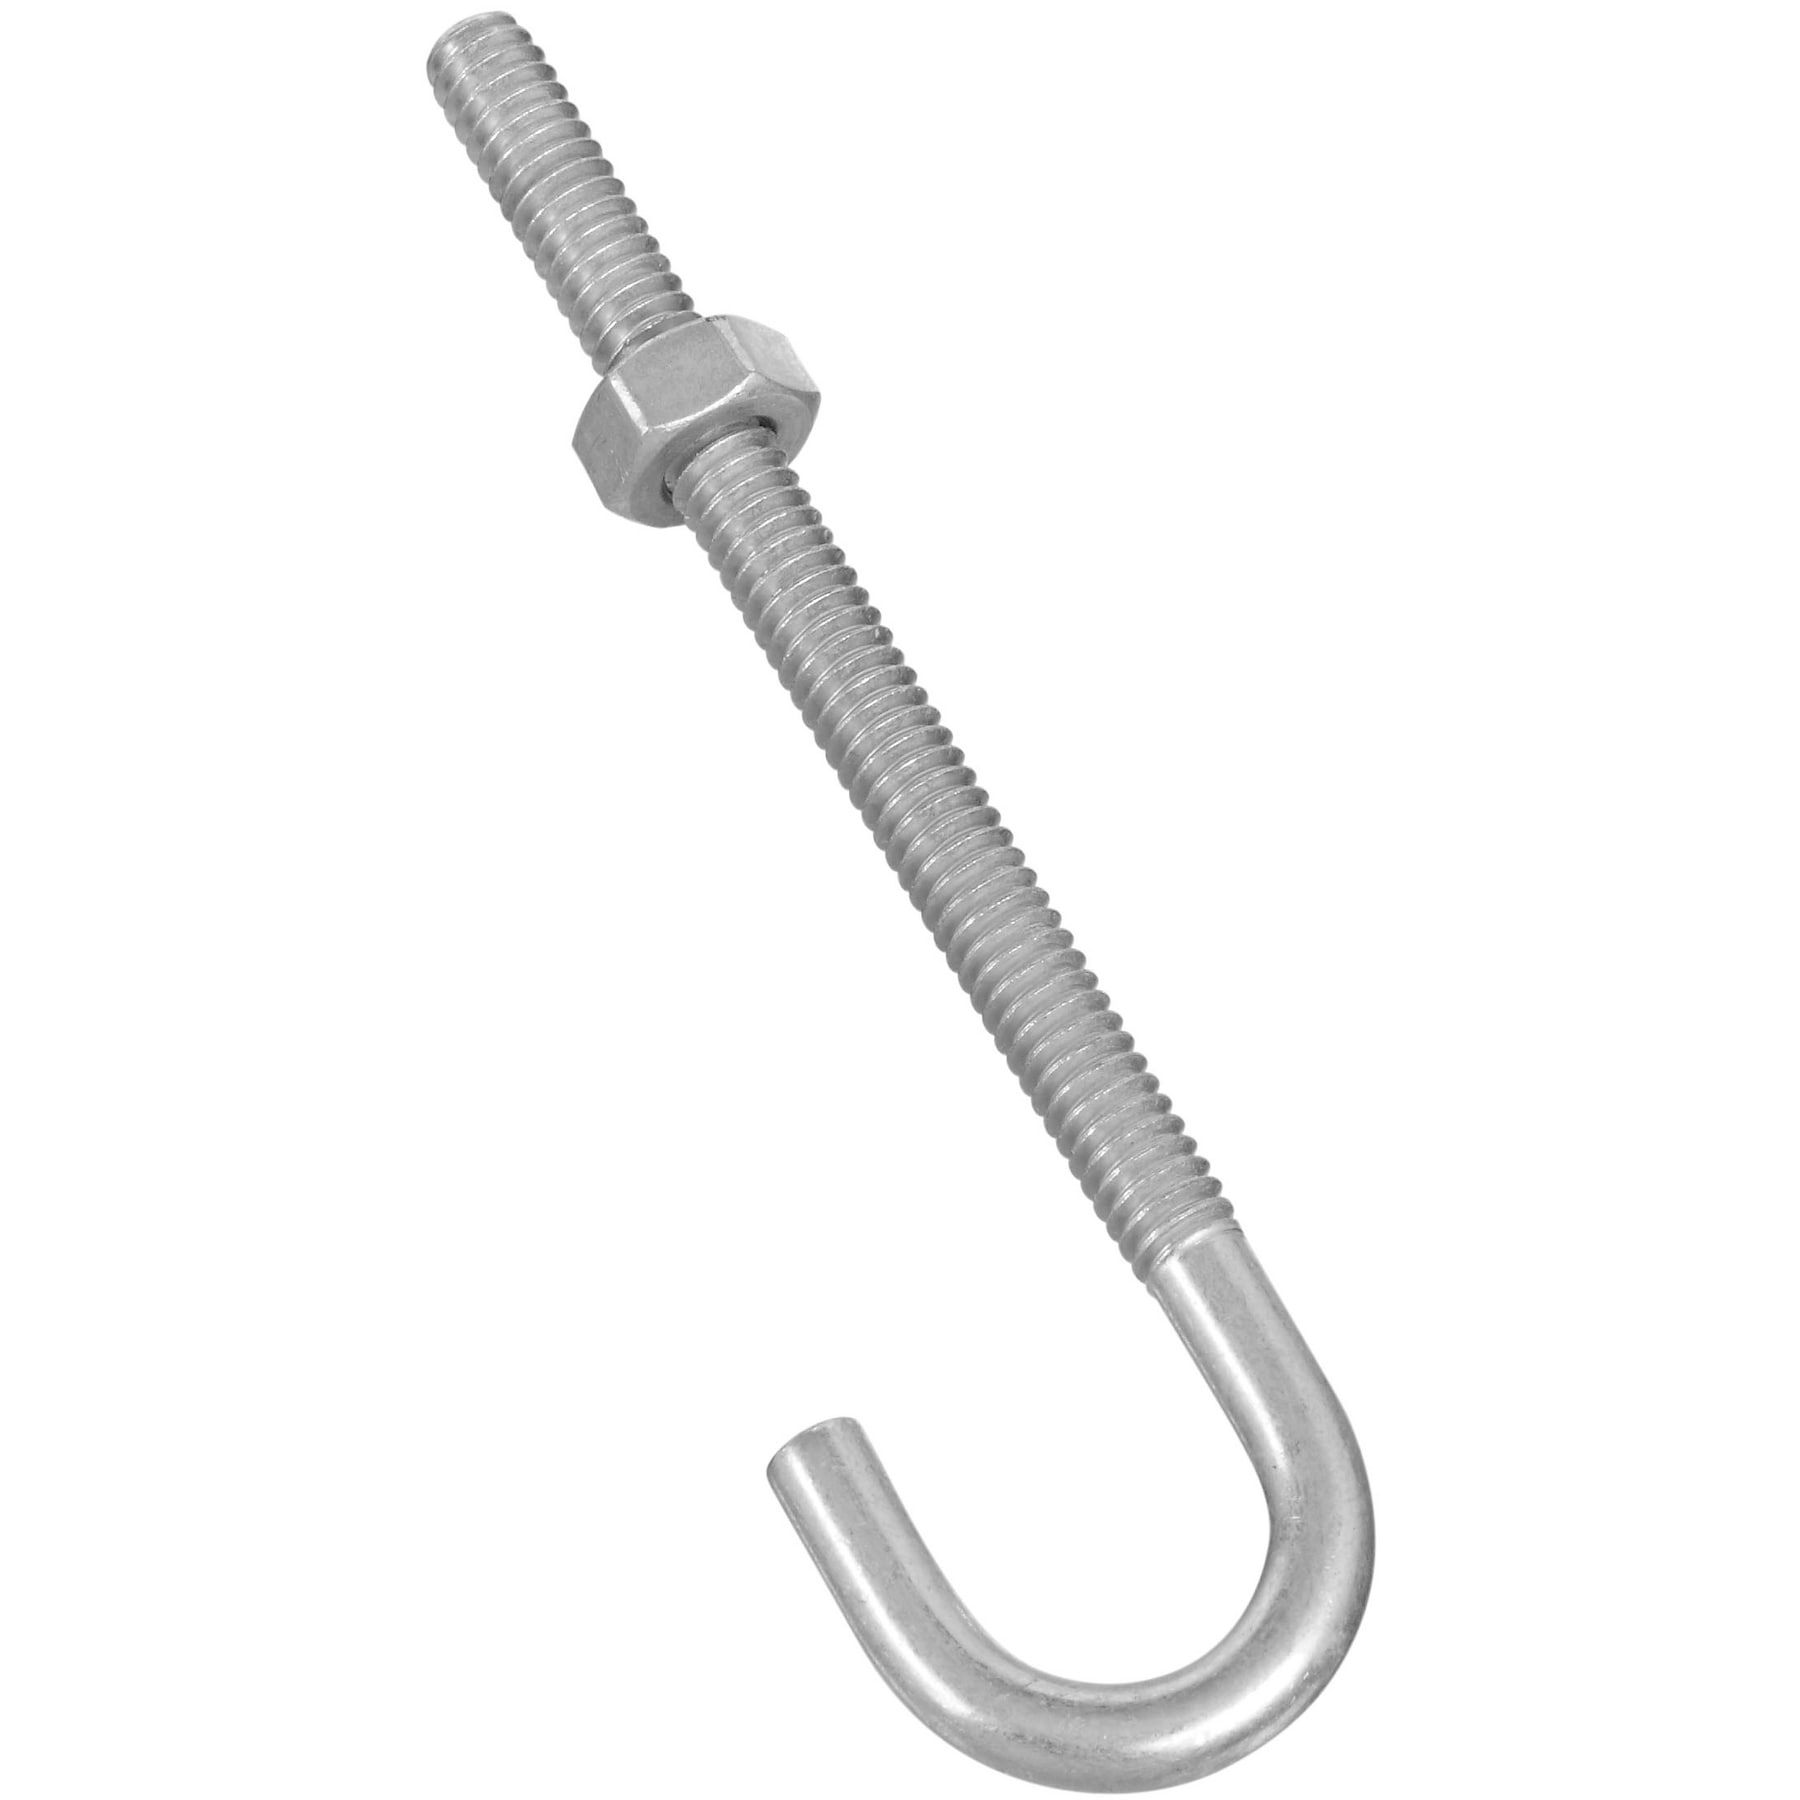 National Hardware 1/4-in x 4-in Zinc-plated Coarse Thread Bolt in